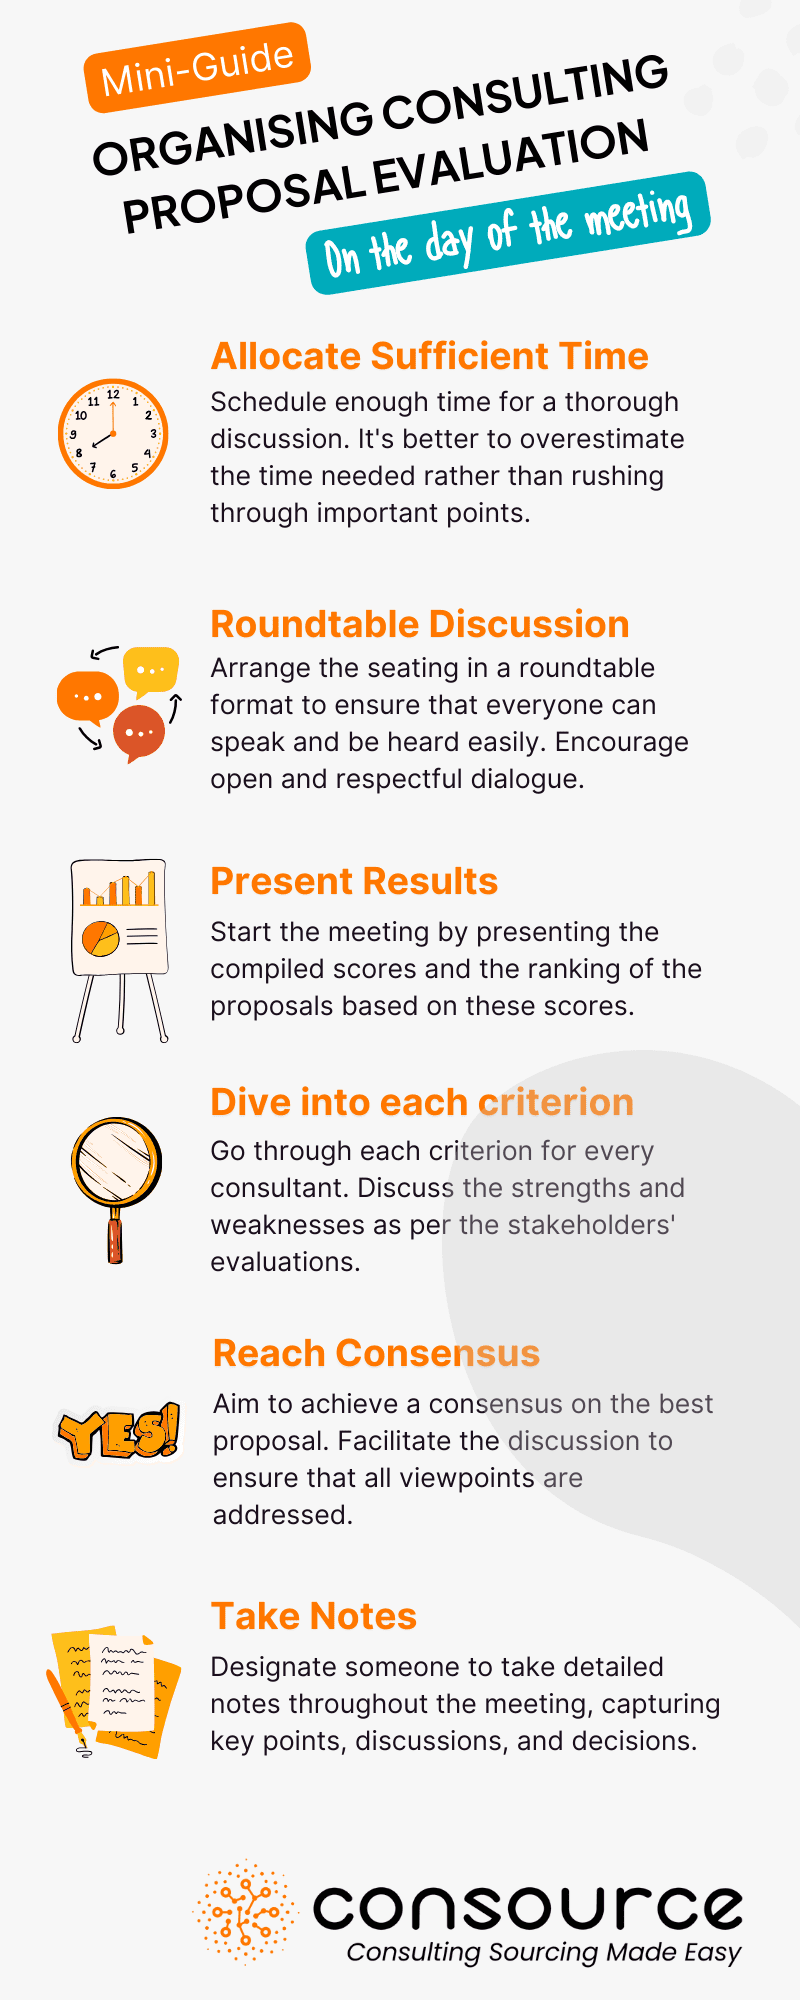 Mini-guide for Organising Consulting Proposal Evaluation (On the Day of the Meeting)